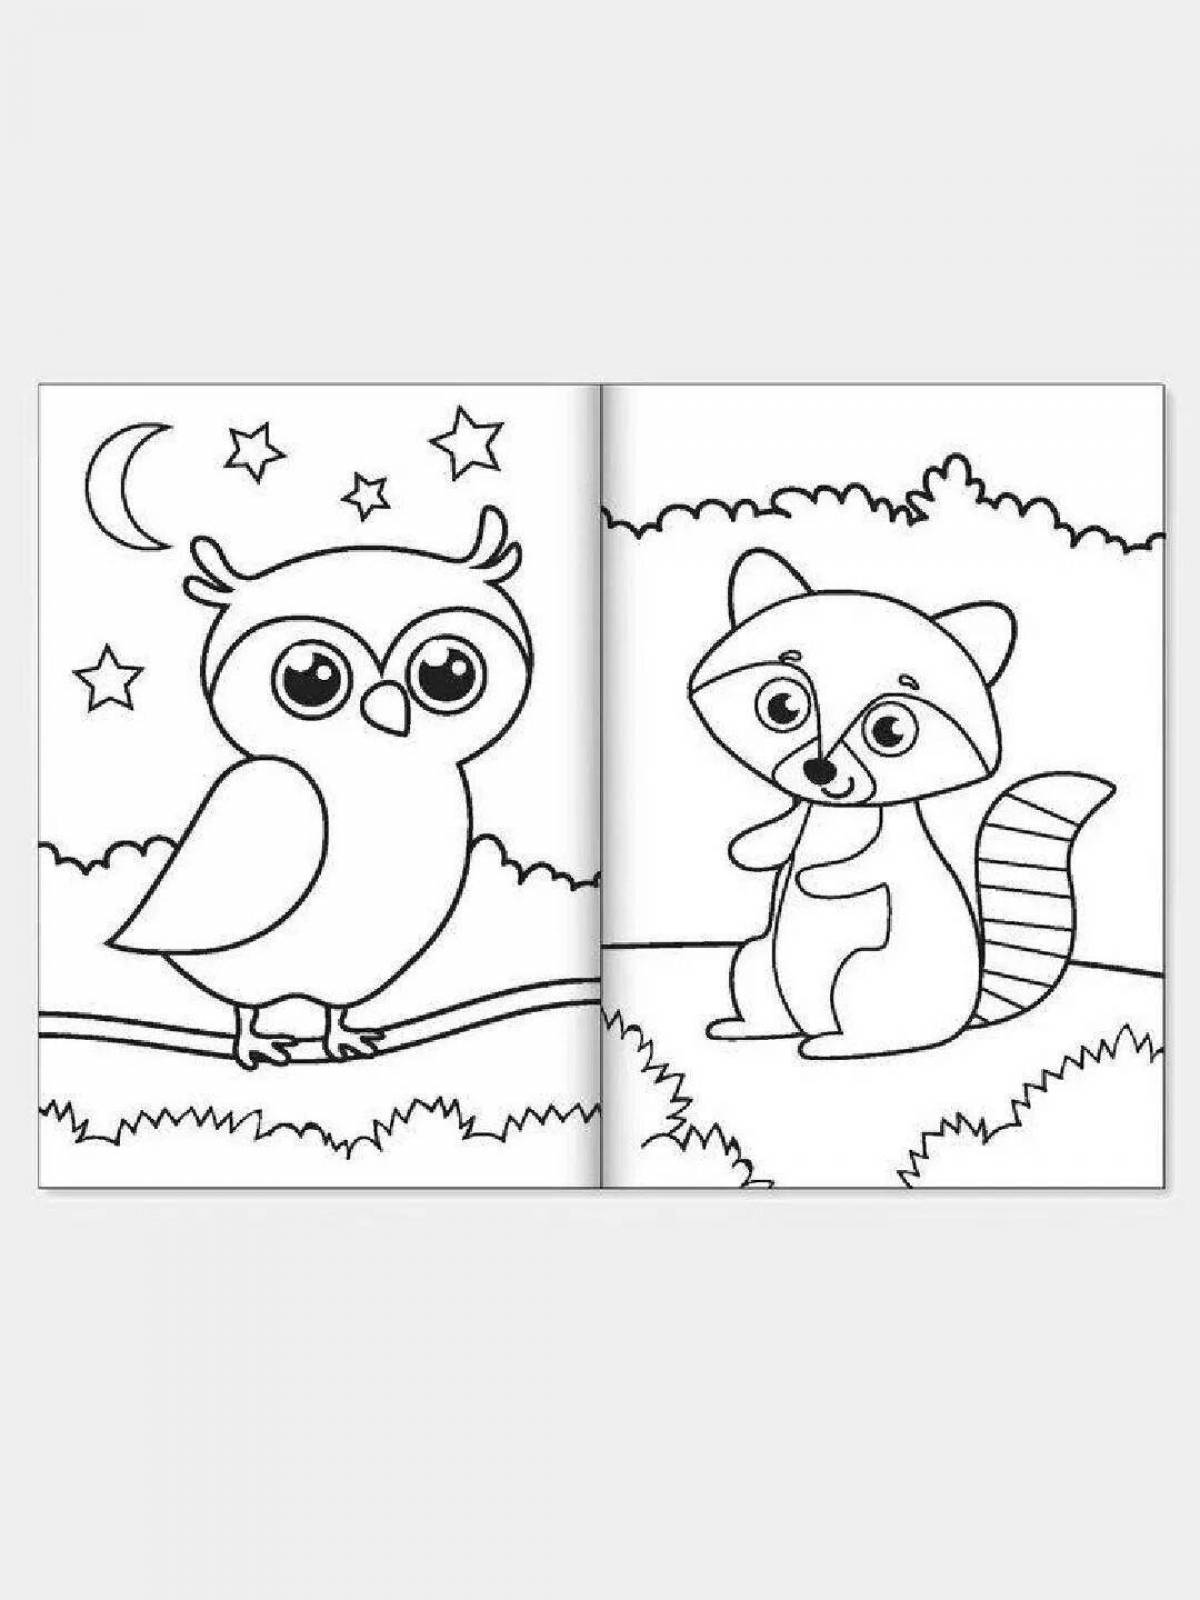 Fun coloring 2 for the little ones